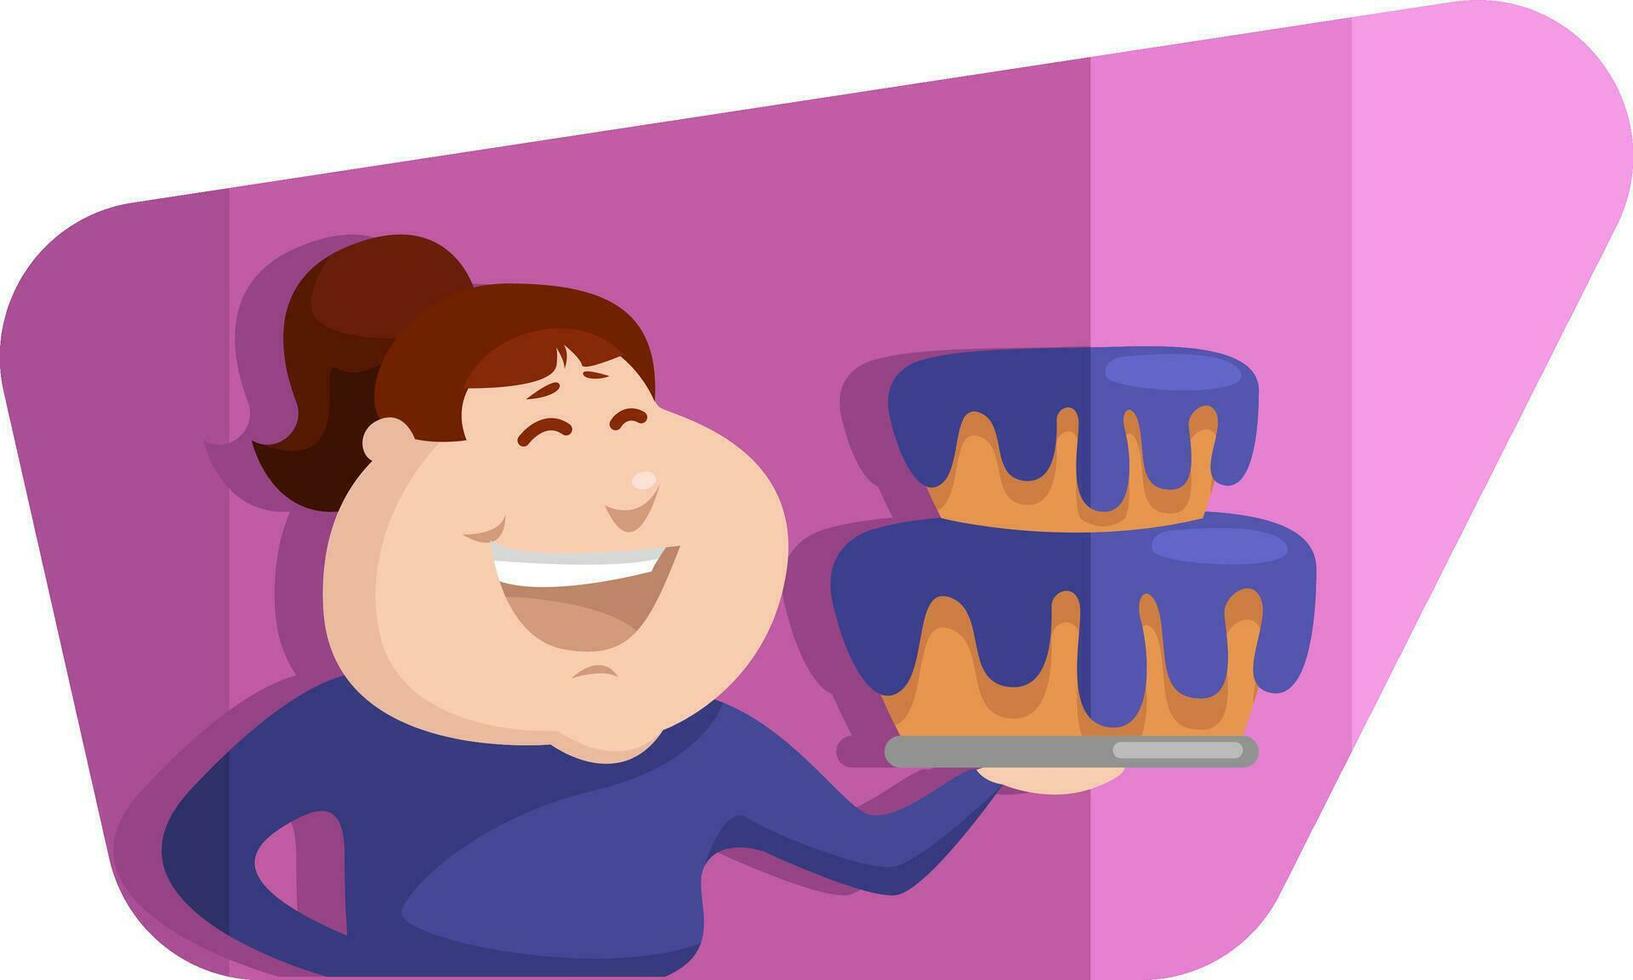 Lady with a cake, illustration, vector on a white background.